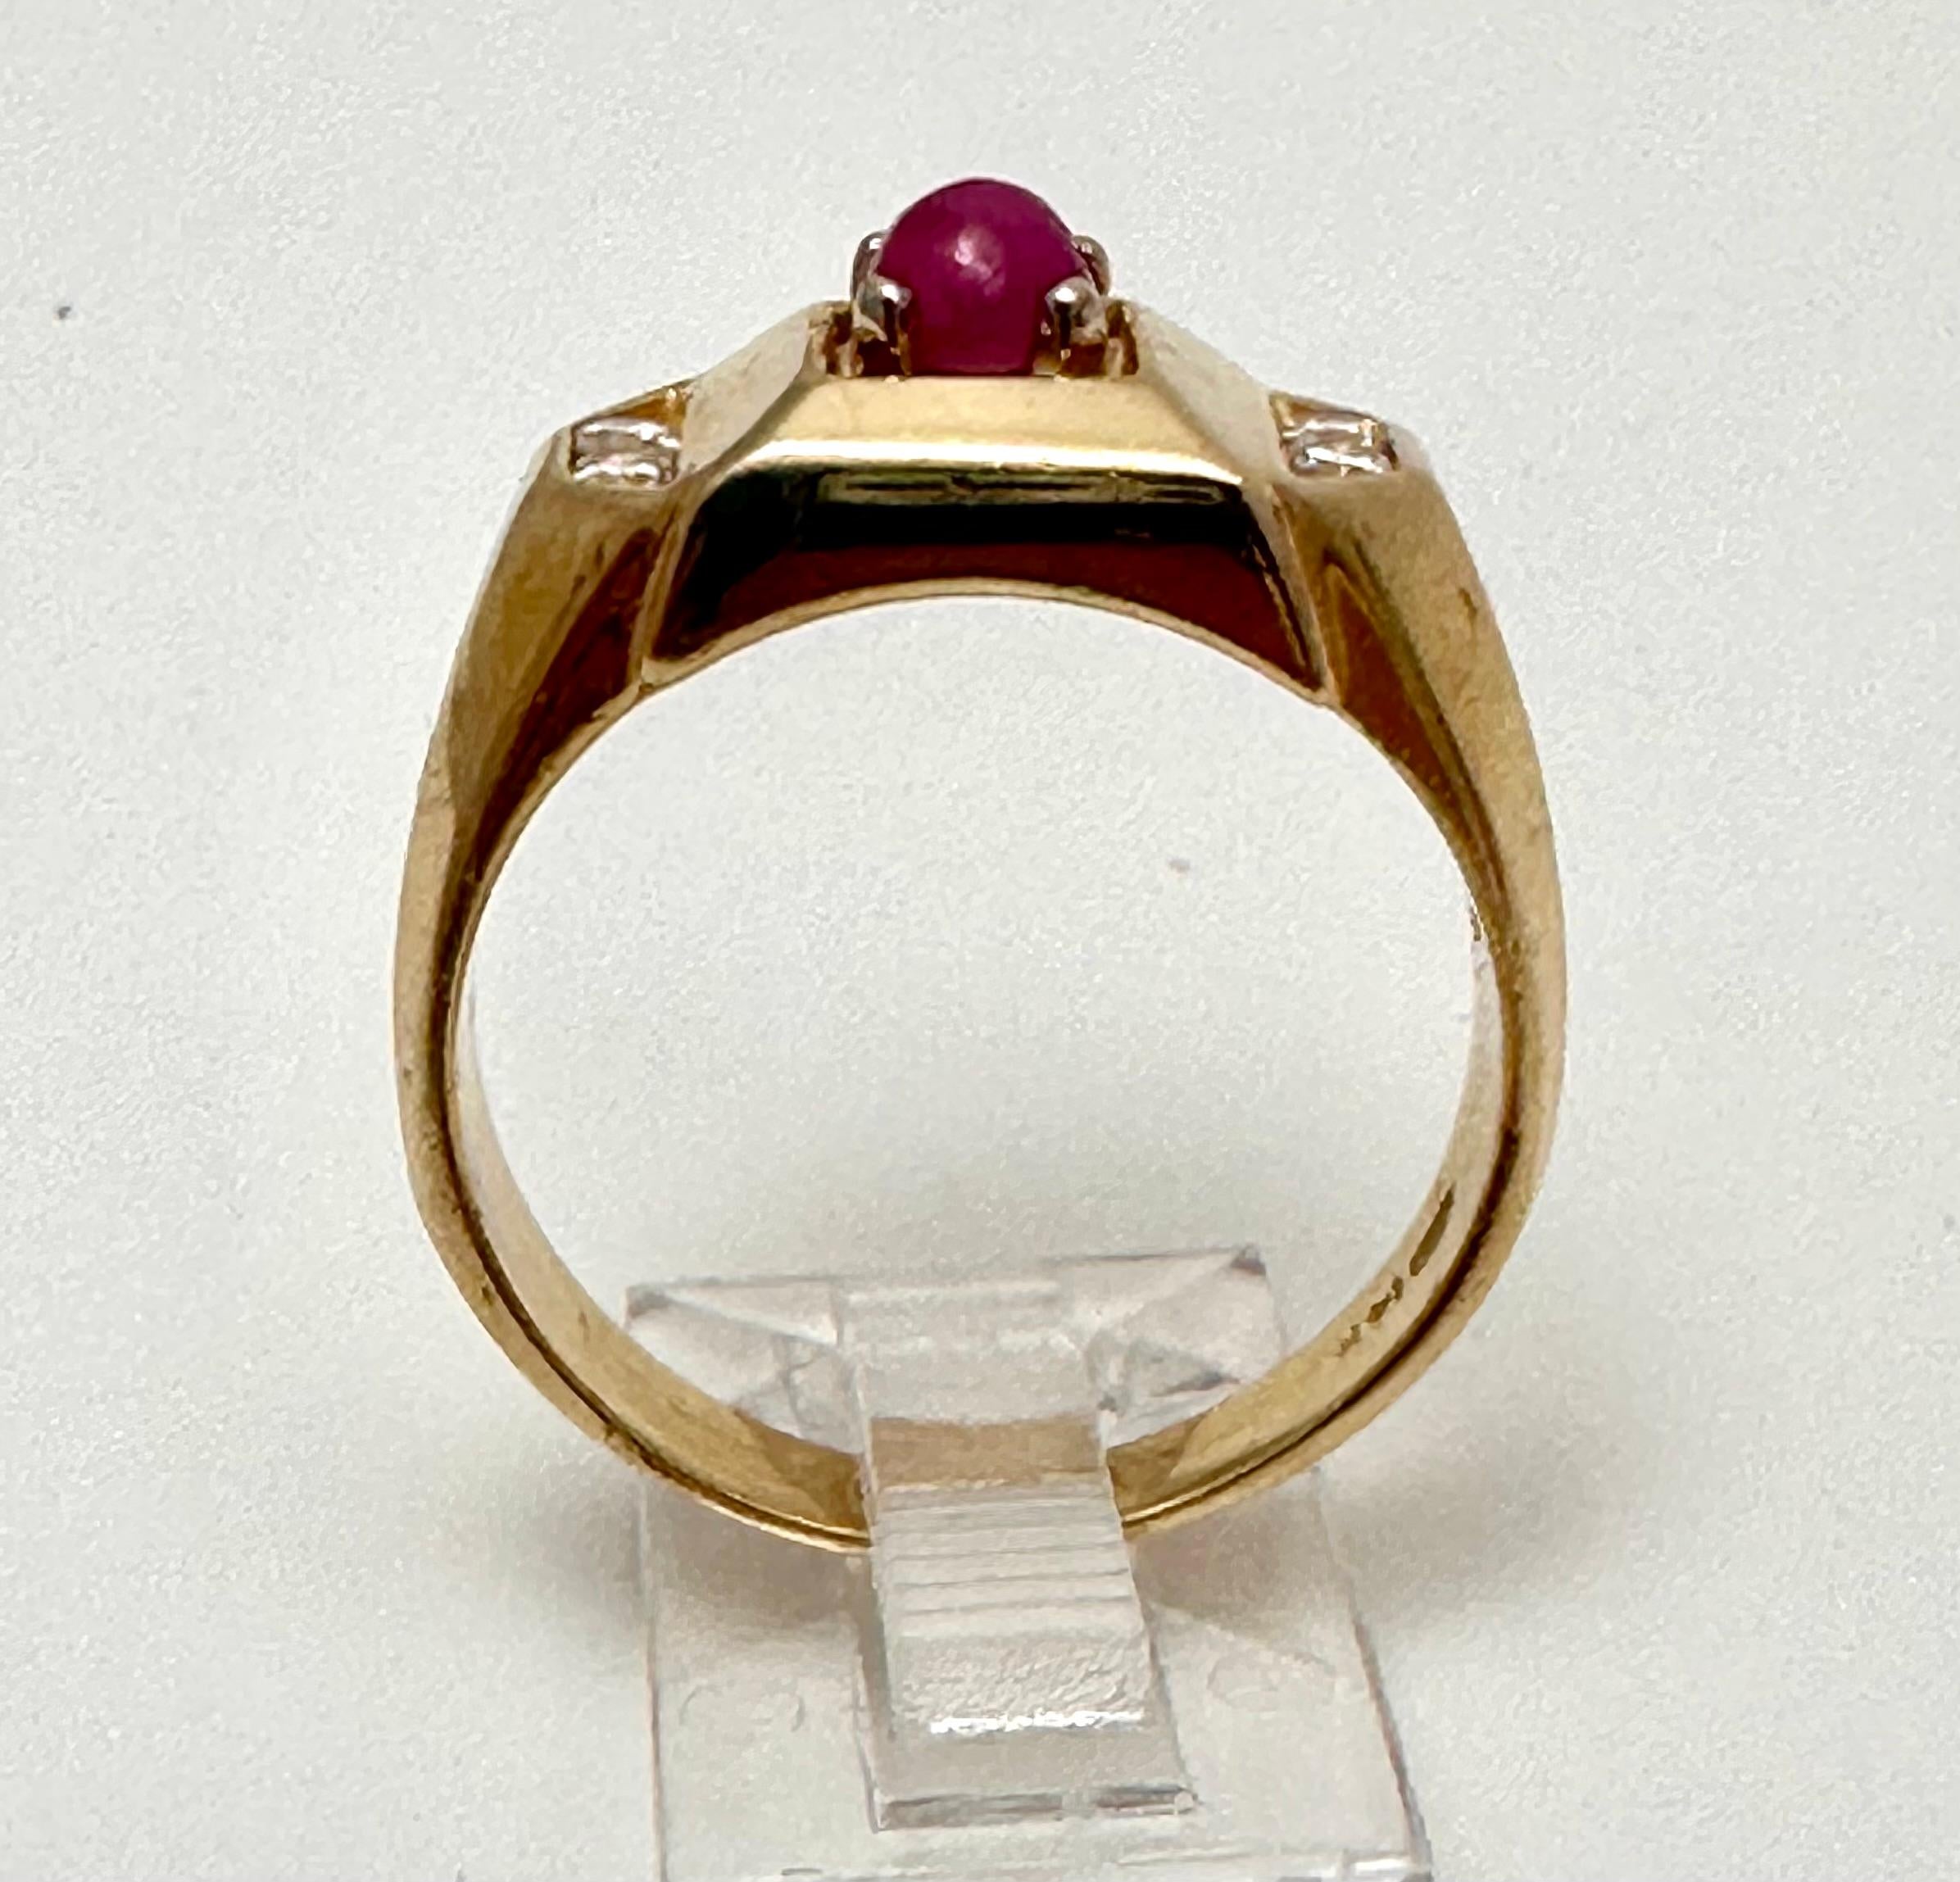 14k Yellow Gold approx. 5mm Cabochon Ruby with 4 Round Side Diamonds Ring Size 9 1/2

The ruby is known as a protective stone that can bring happiness and passion into the life of the wearer. Apart from its red colour, this is why the ruby makes a